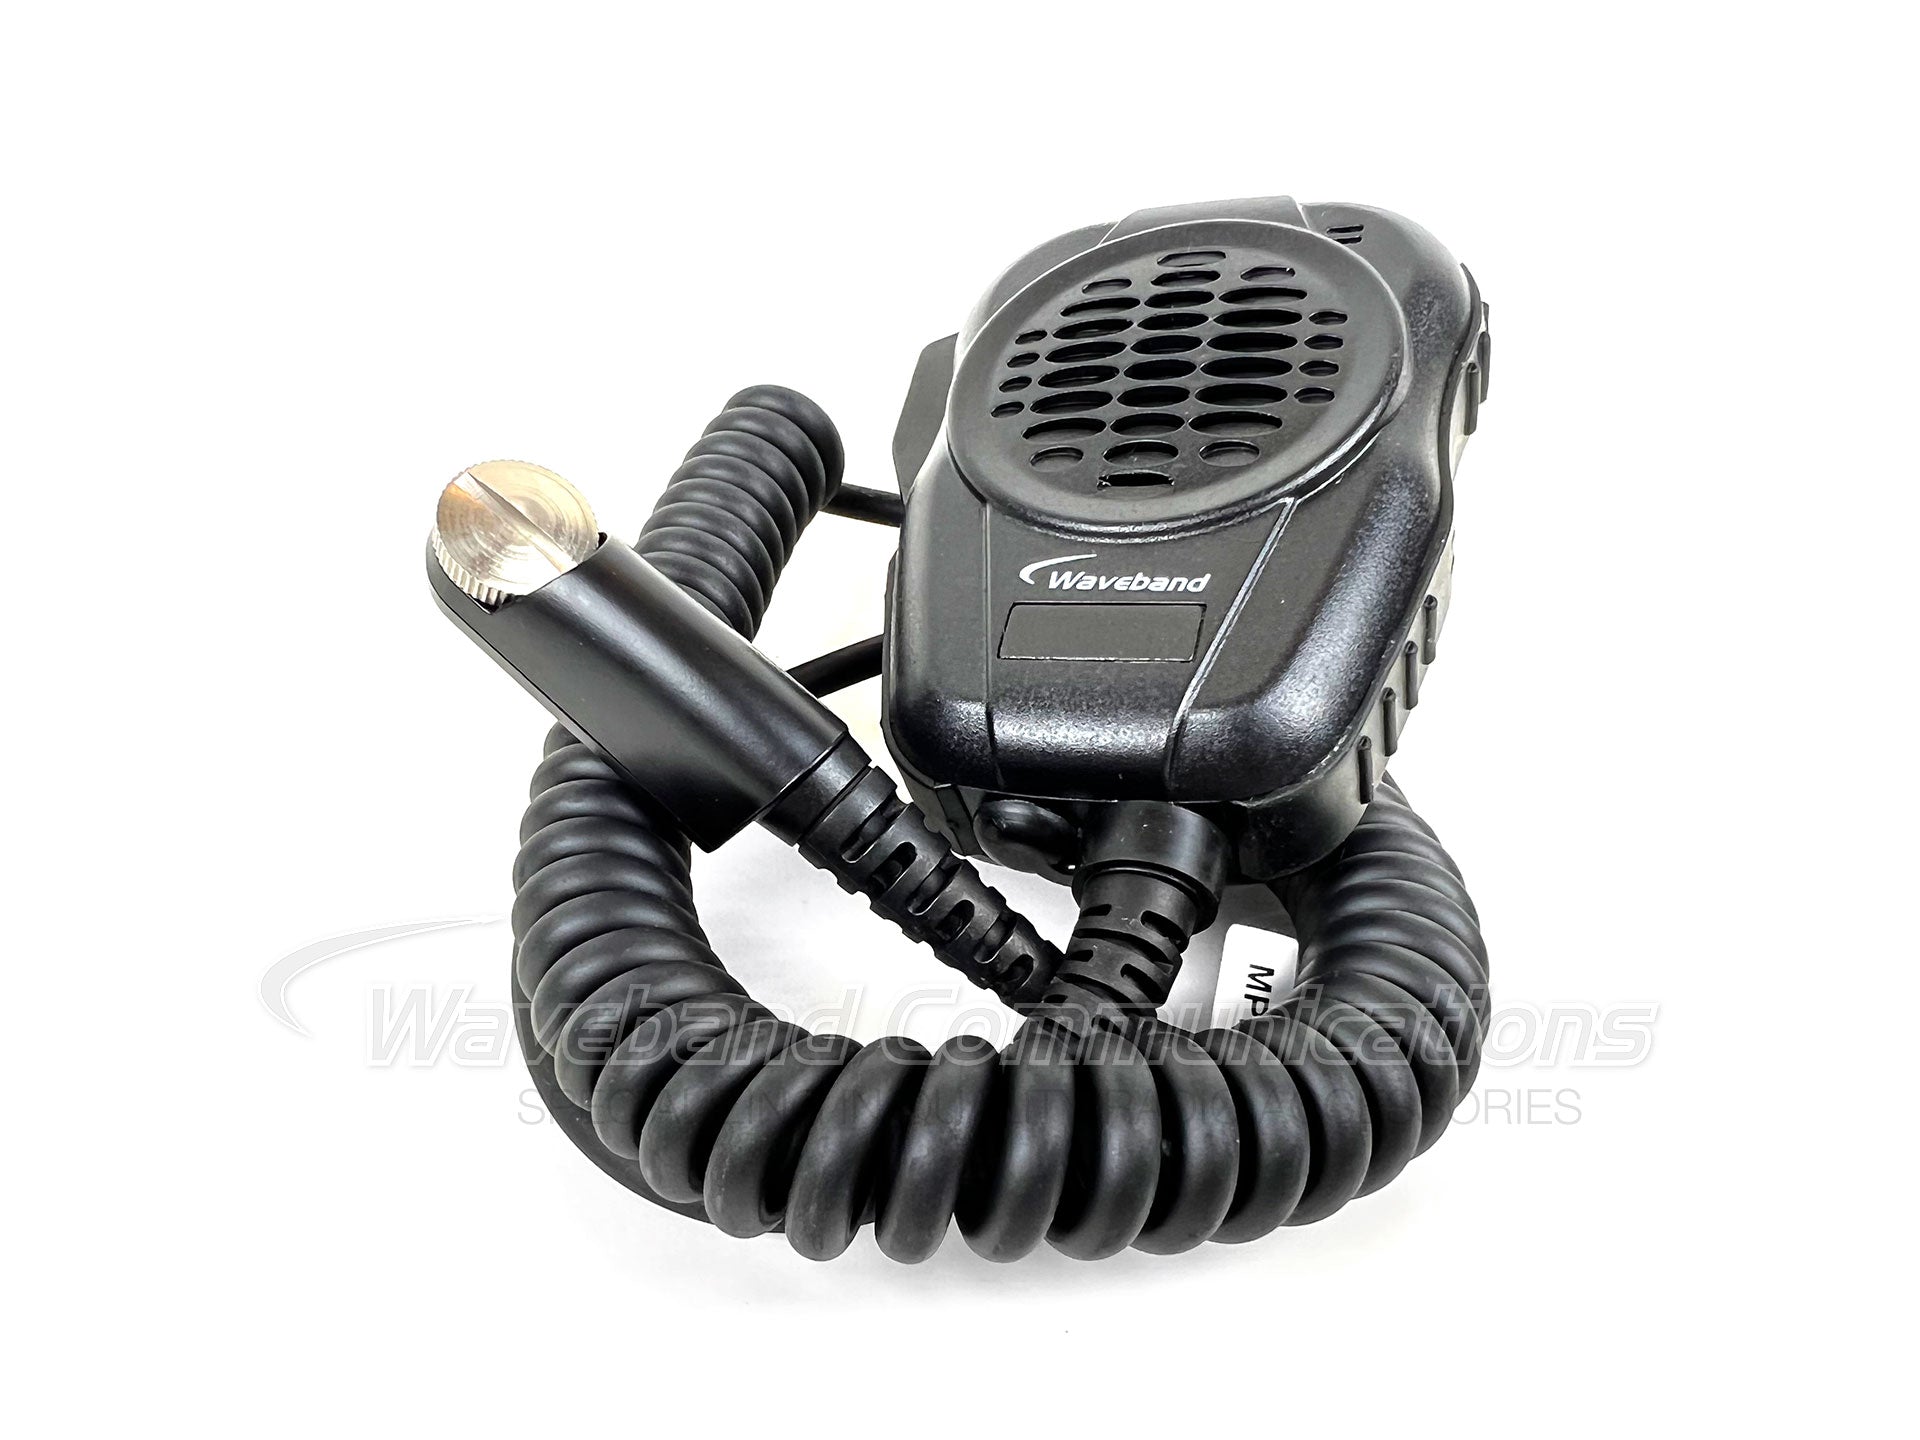 Waveband WX-8004 Series Rugged Heavy Duty Public Safety Microphone for Harris XL-200P